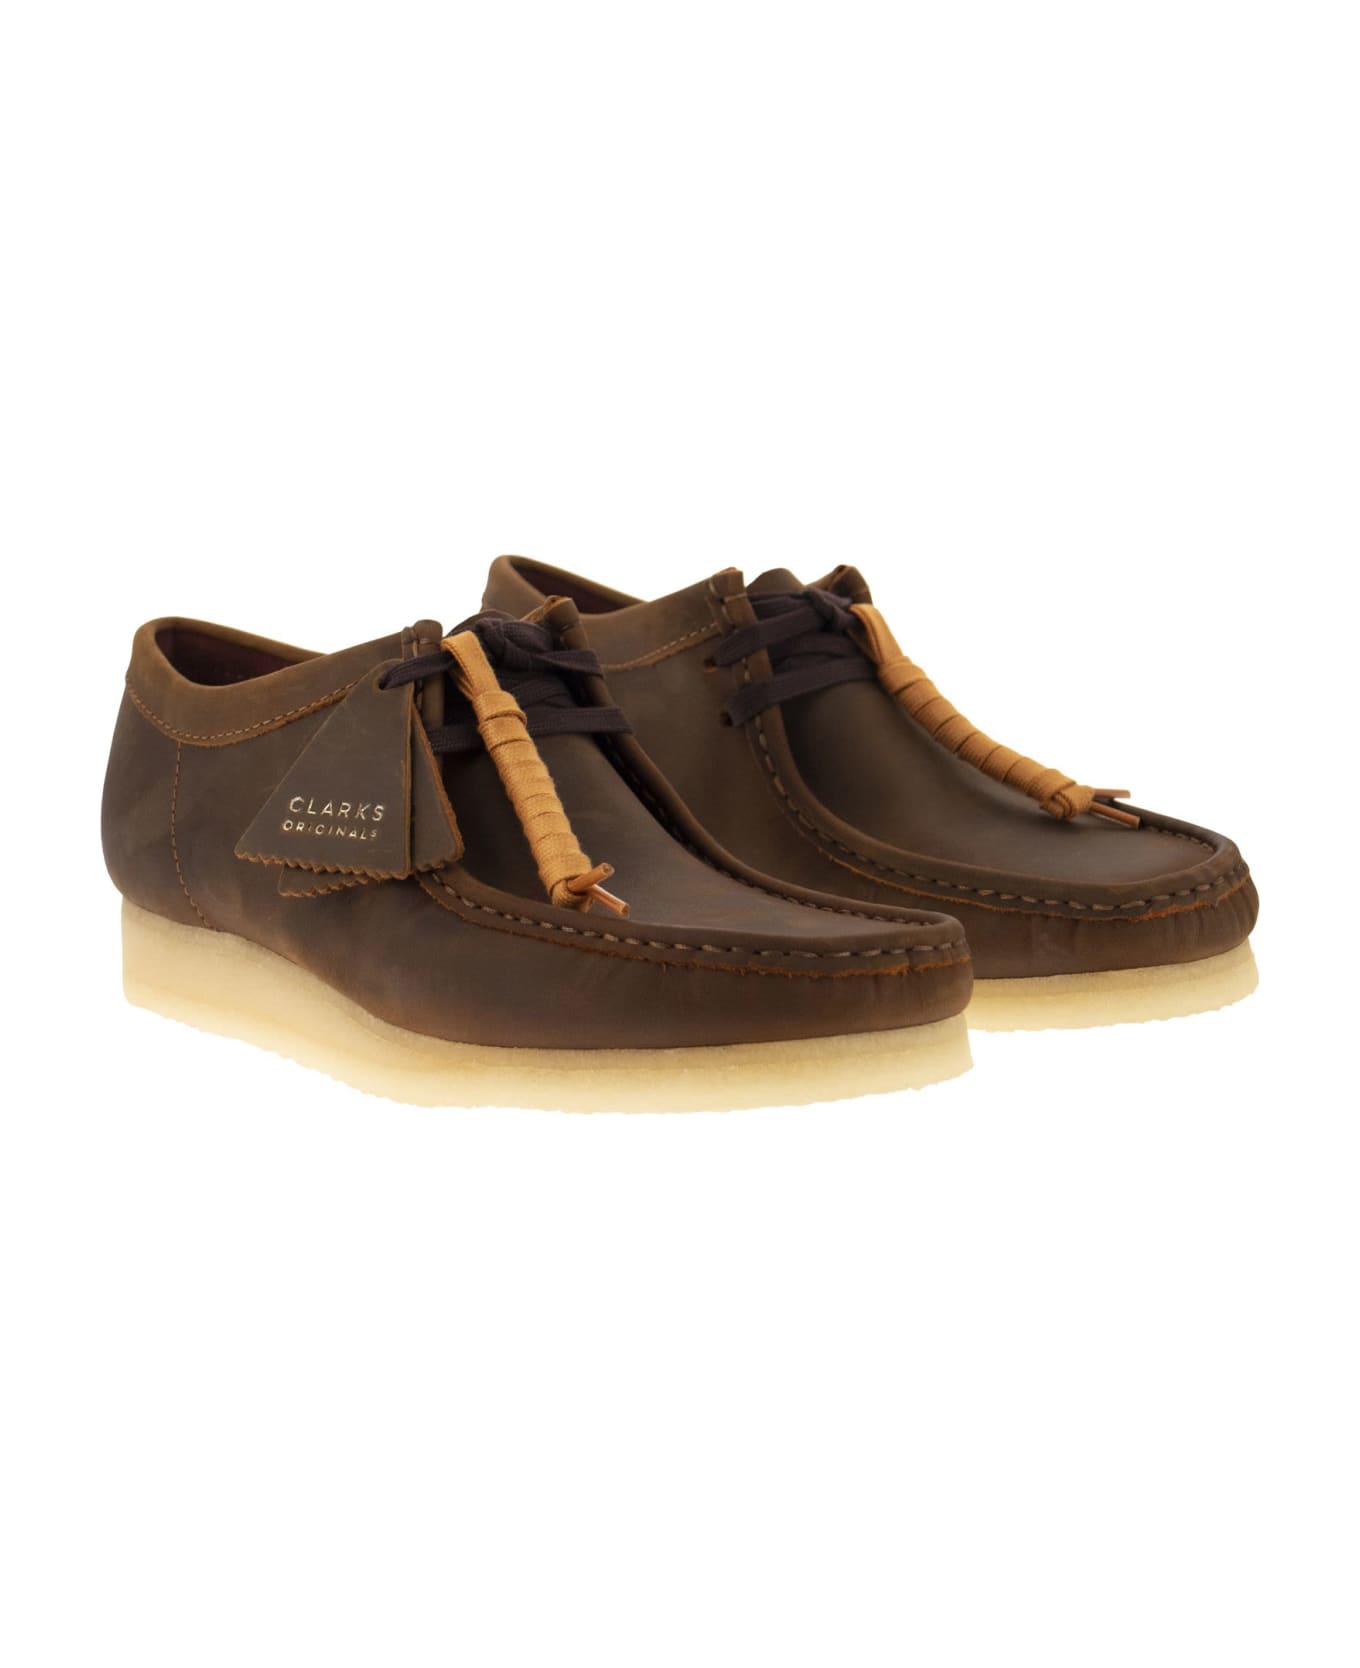 Clarks Wallabee - Suede Leather Shoe - Chocolate